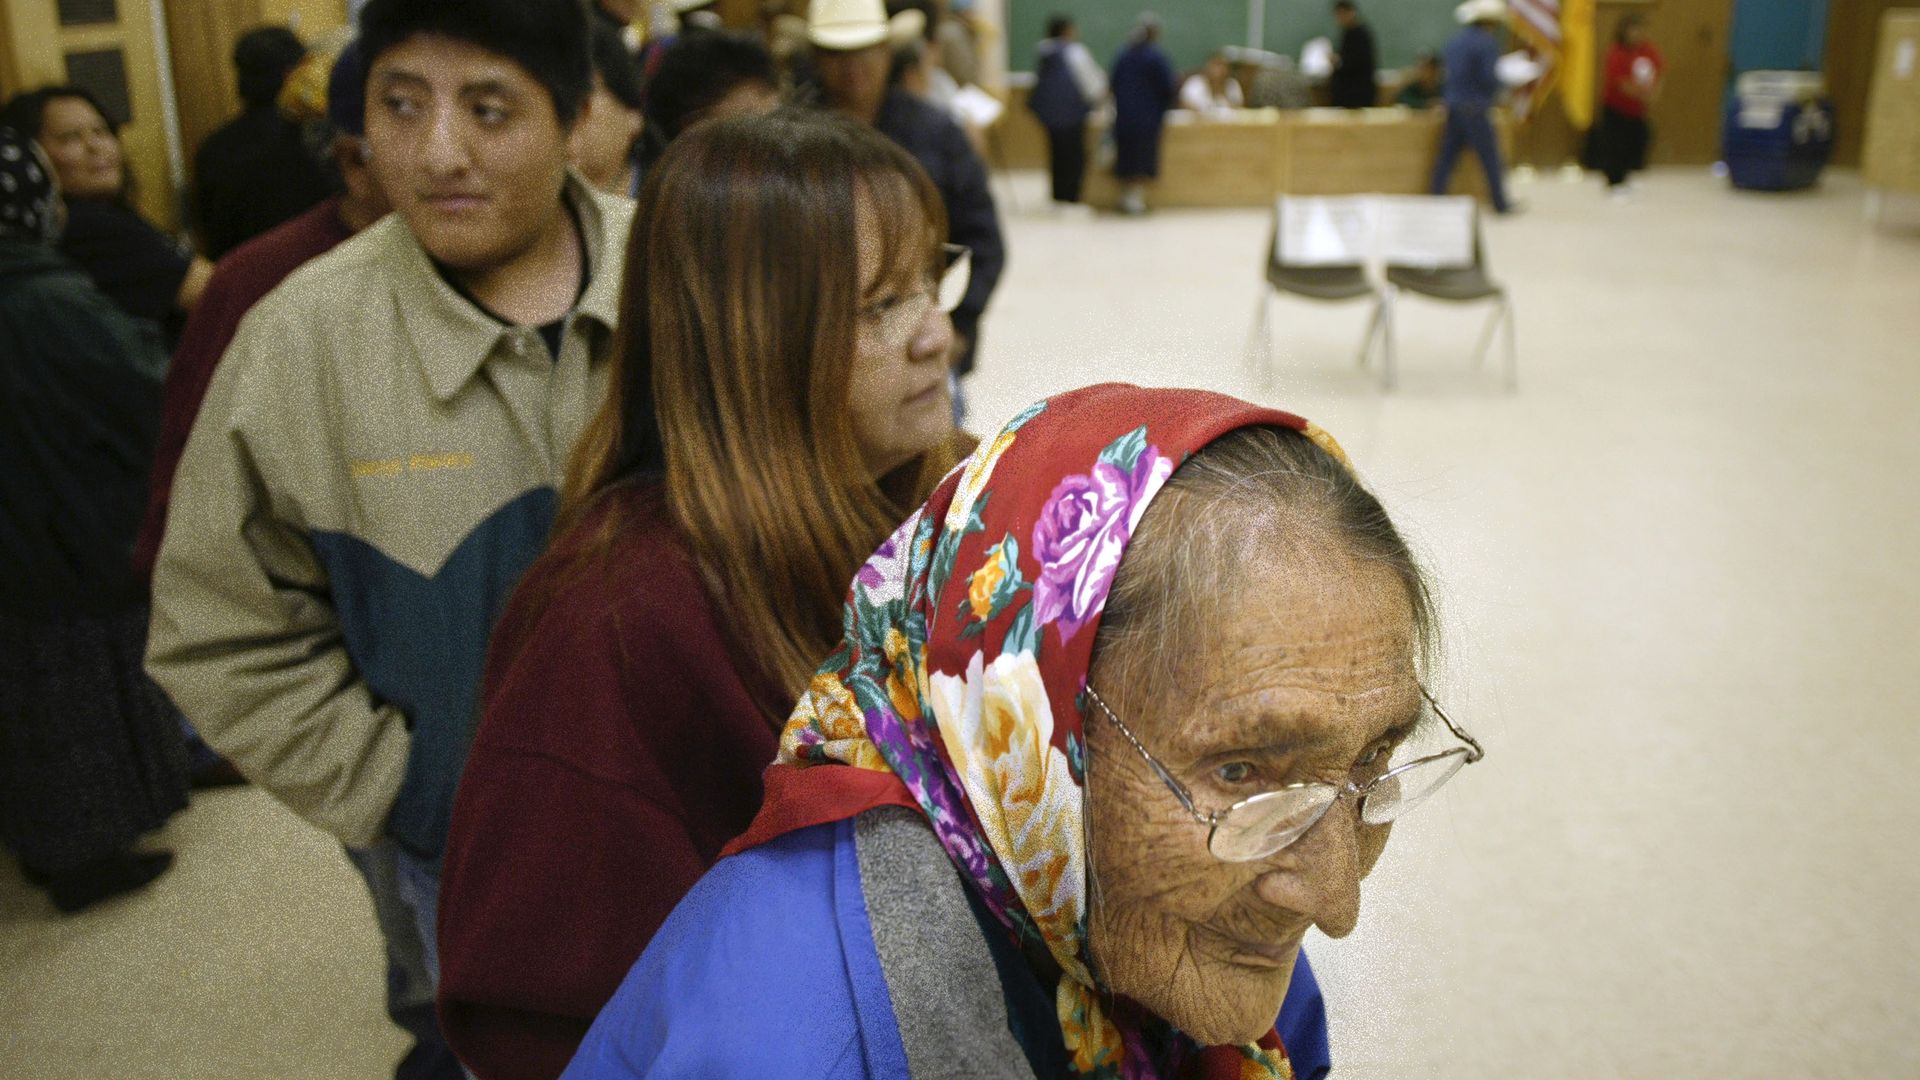 Elsie Werito, 84, a member of the To'hajiilee Chapter of the Navajo Nation, waits in line to cast her ballot at the Desiderio Center November 2, 2004 in To'hajiilee, New Mexico.